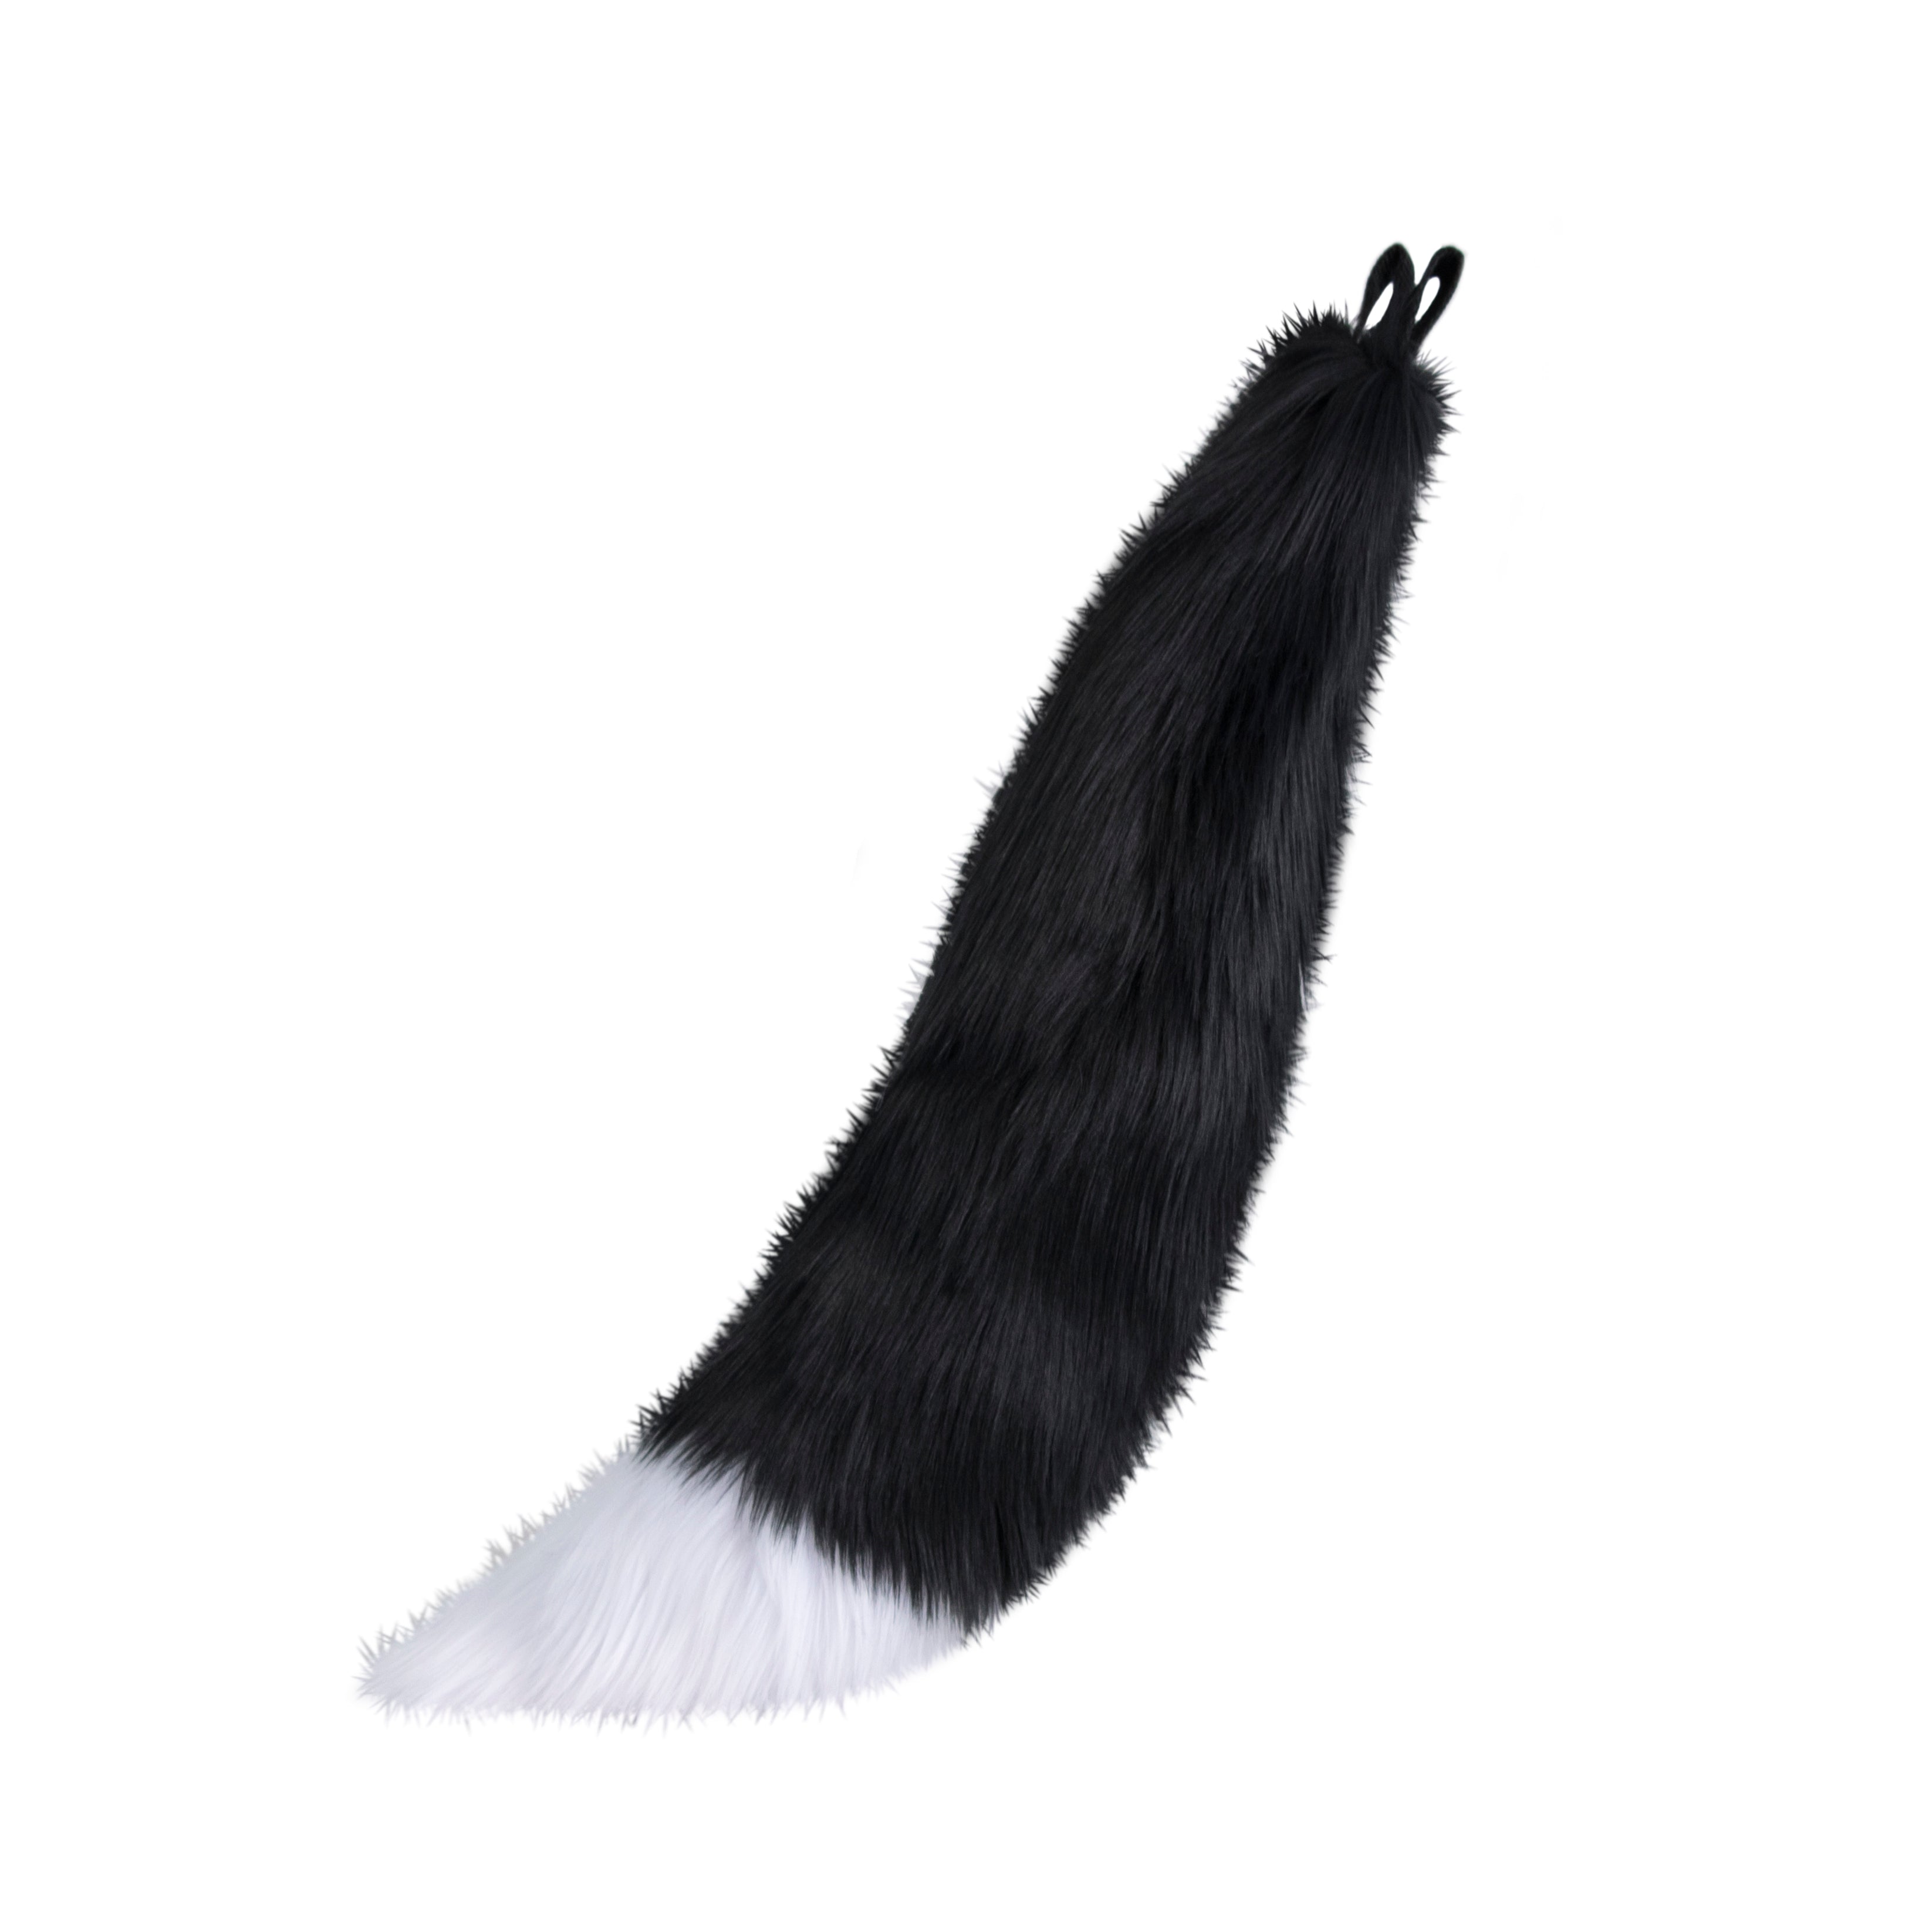 black Pawstar fluffy furry costume mini fox tail. Great for Halloween, Parties, and more.